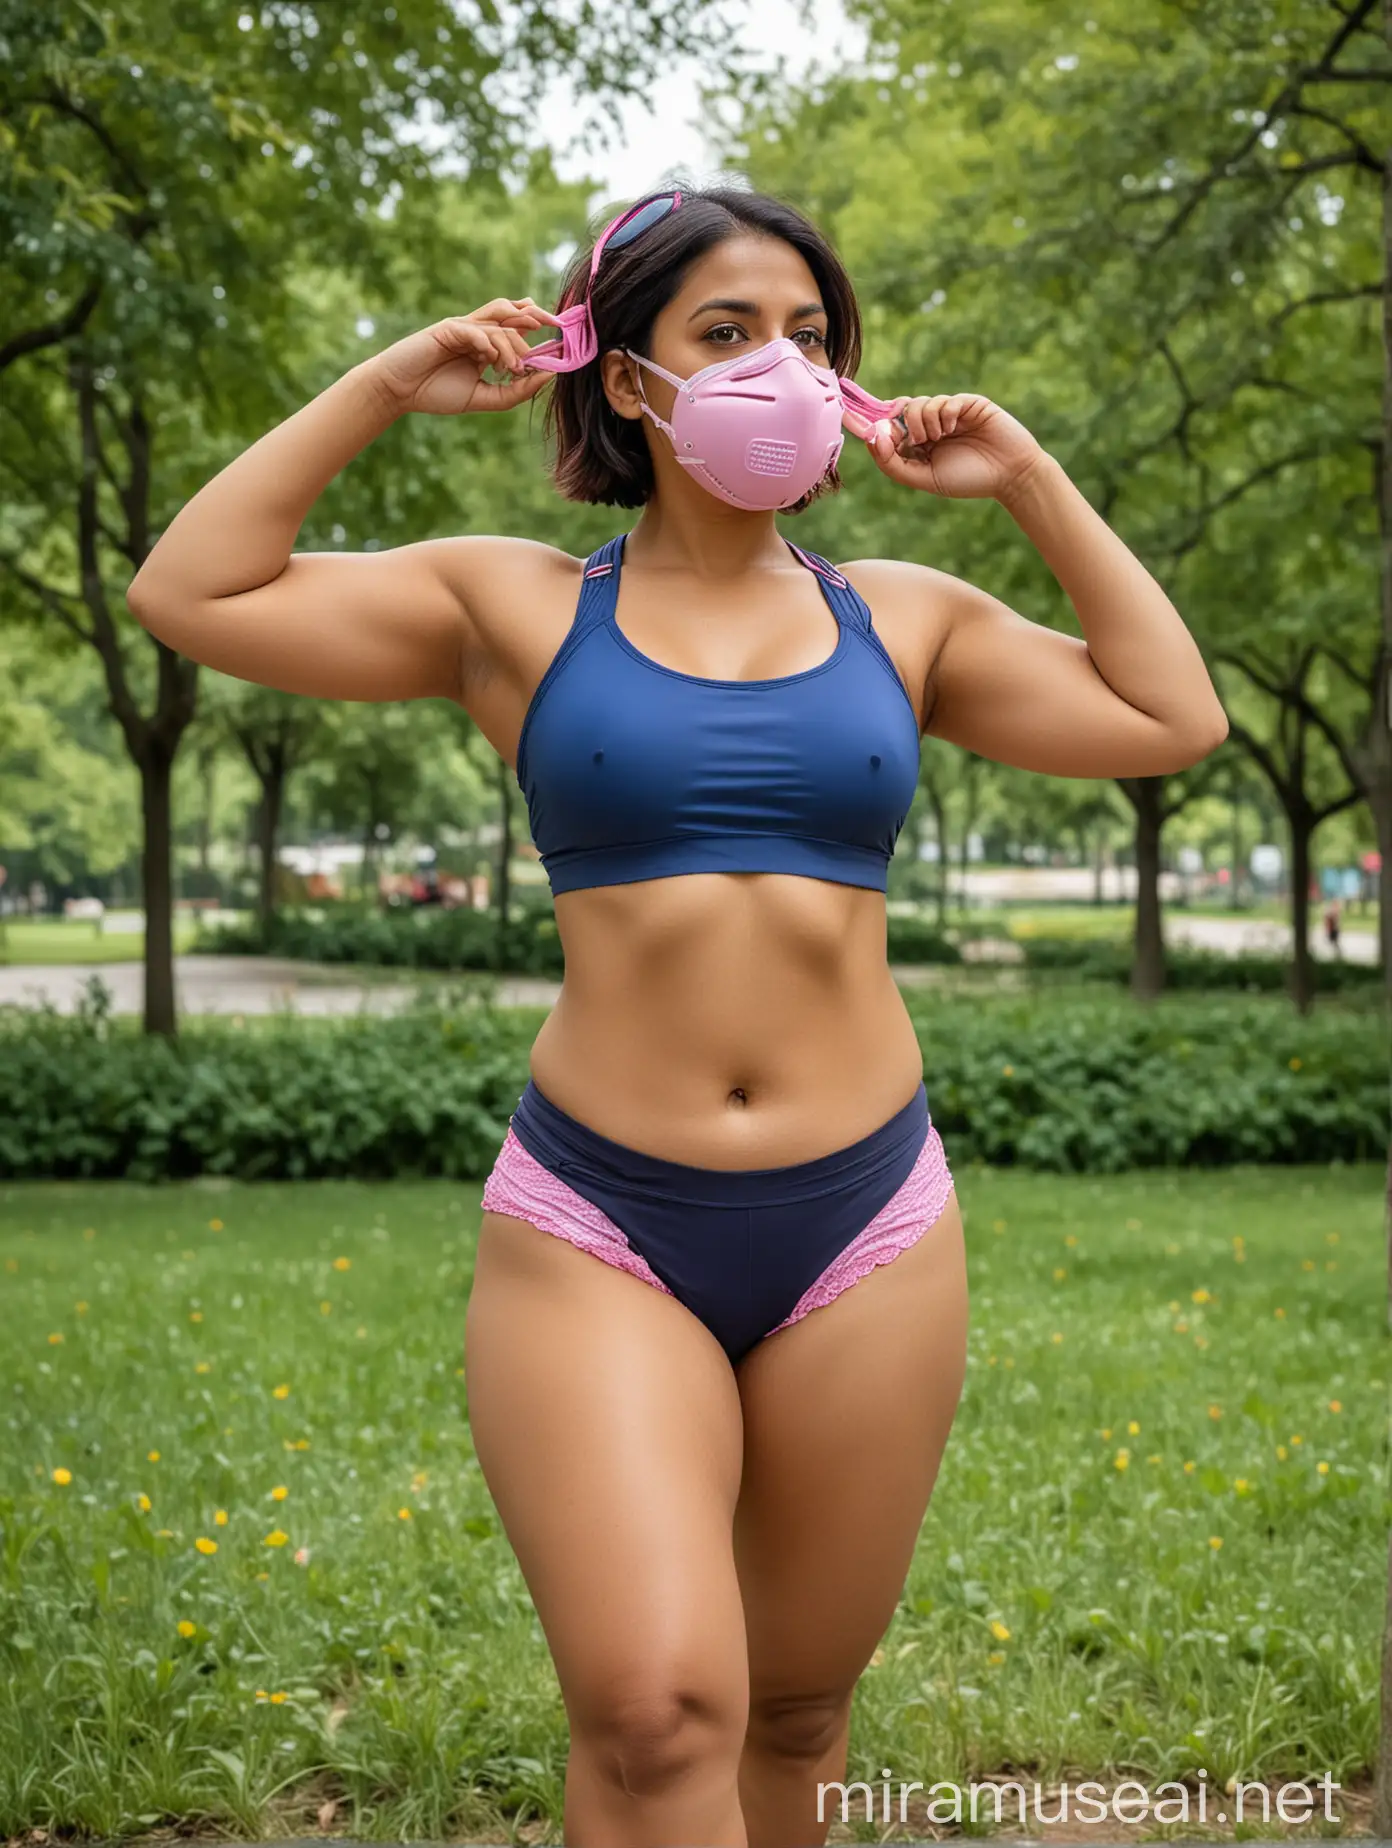 a bodacious, buxom, indian woman in her late 30s with bobbed hair, in a respirator mask, stretching in running shoes, in a park, wearing a sports bra, and high-waisted french cut bikini bottoms, blue with pink trim